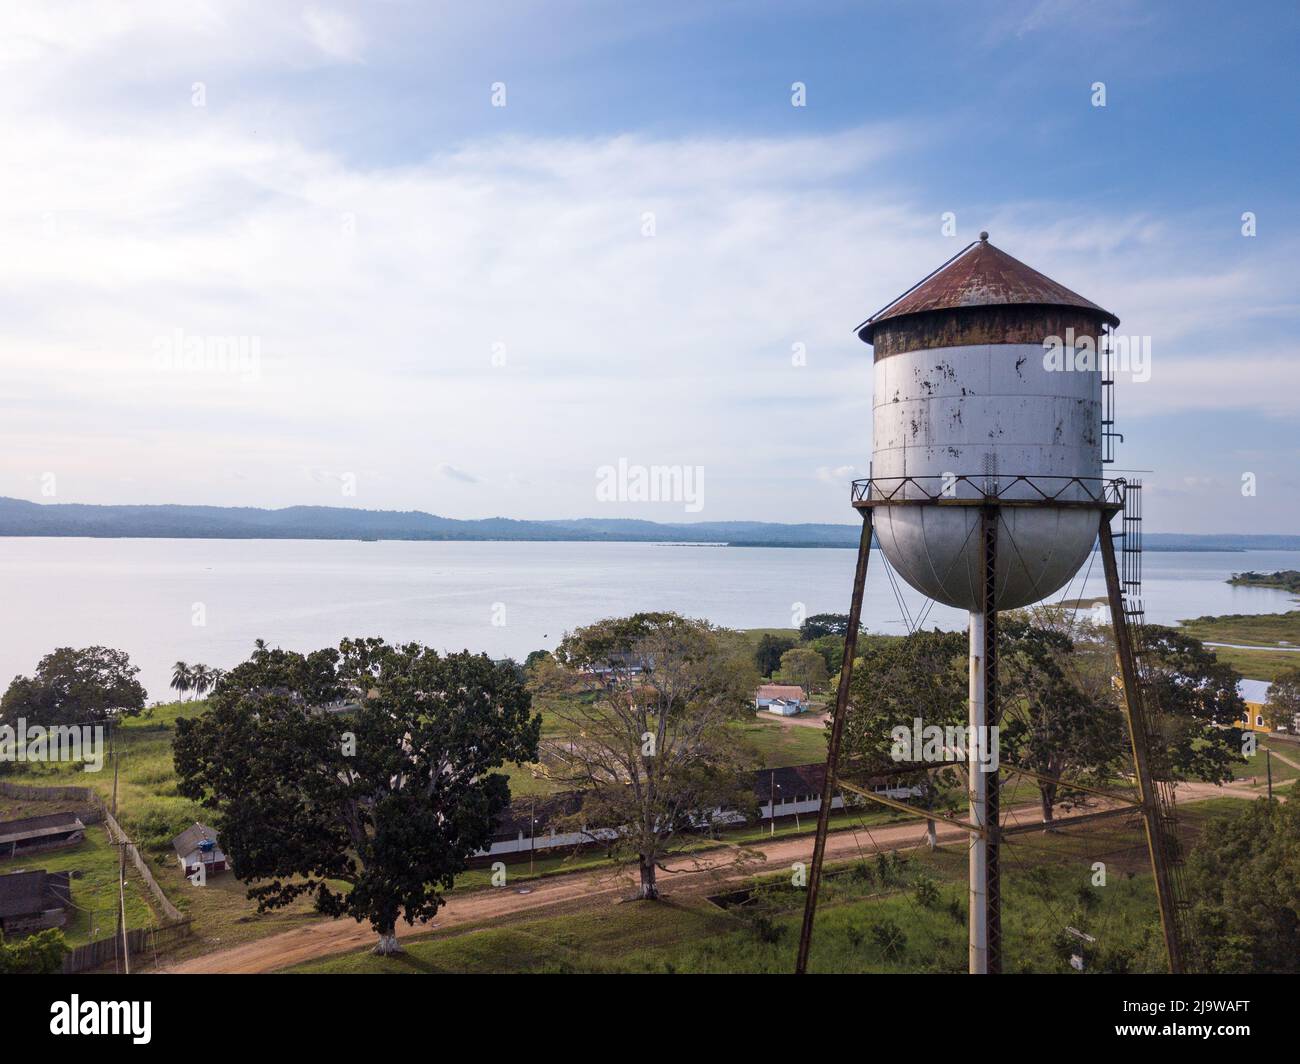 Drone aerial view of Fordlandia city skyline in Amazon rainforest, Brazil. Tapajos river and historic water tank tower. Town built by Henry Ford Stock Photo